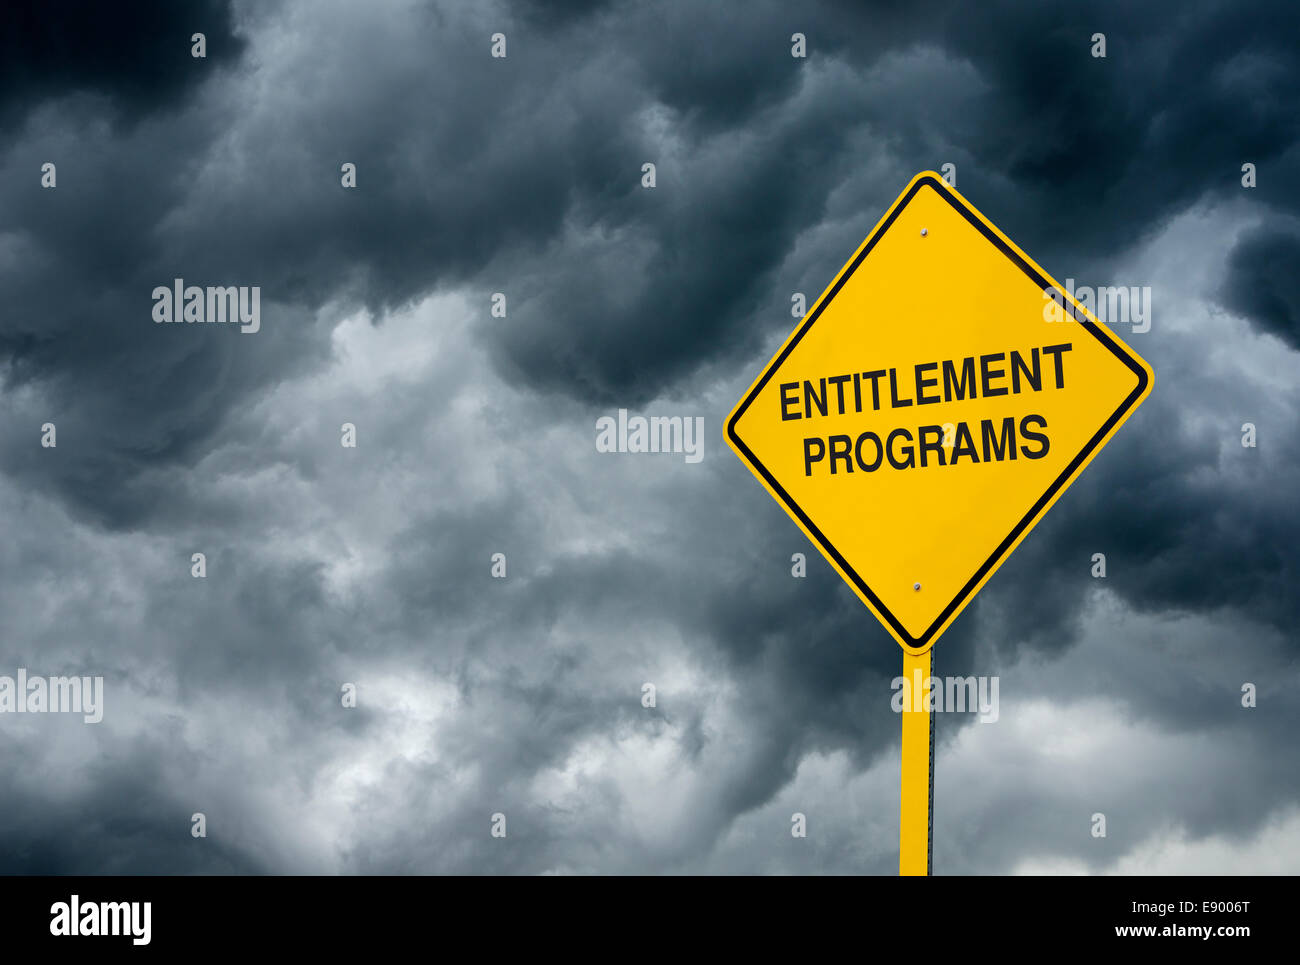 A Caution Sign in front of storm clouds warning of 'Danger Entitlements Programs.' Stock Photo